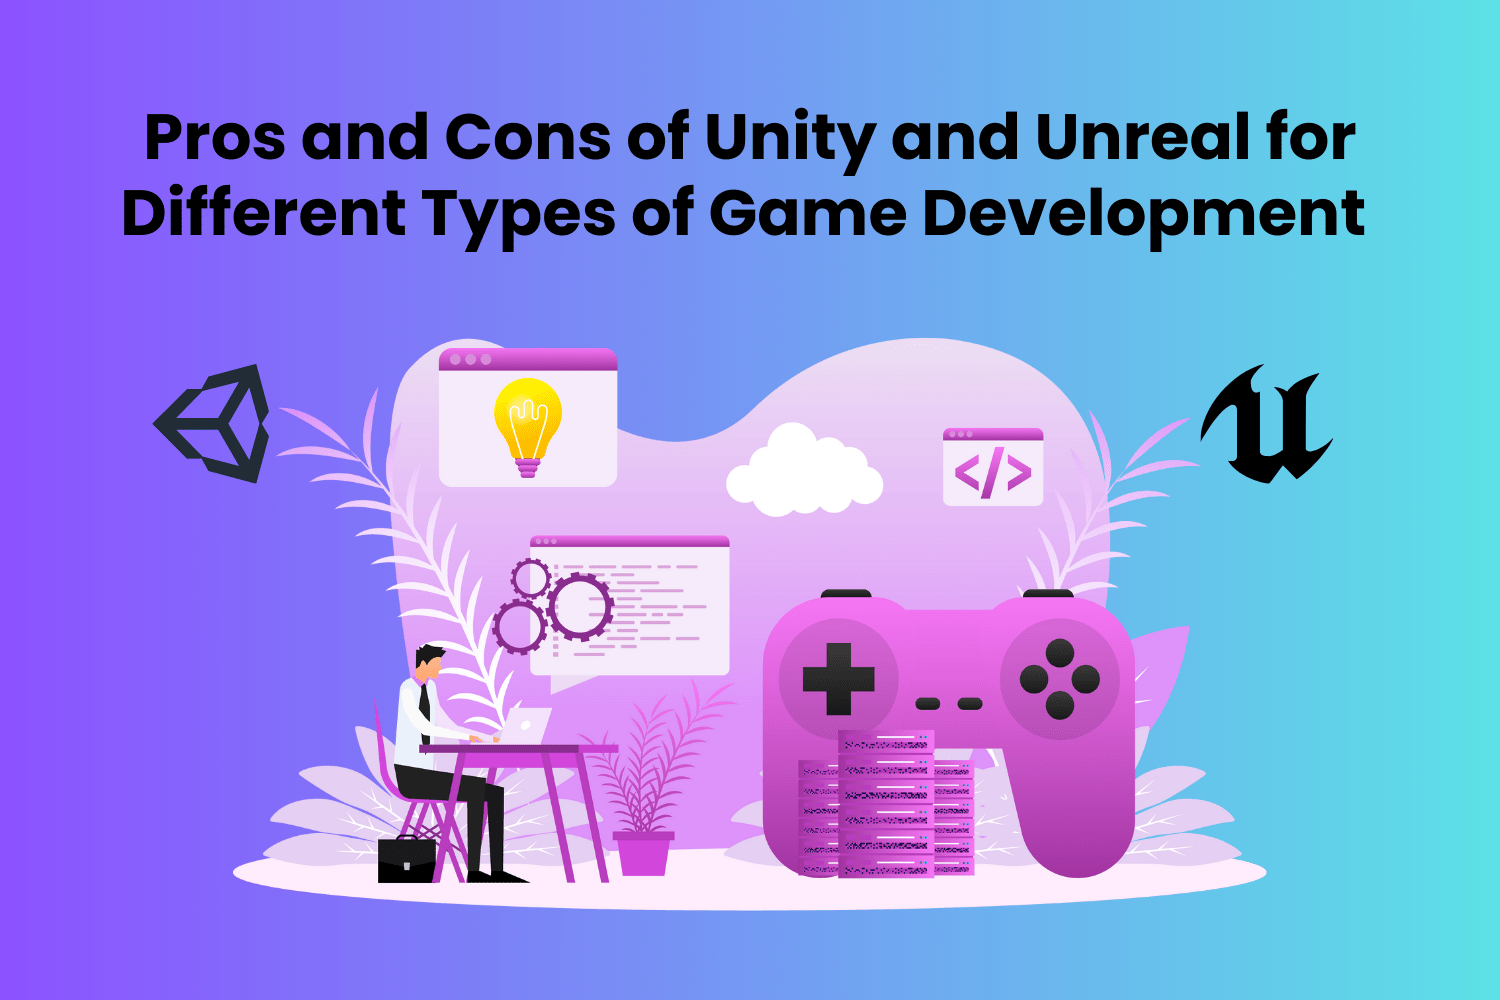 Pros and Cons of Unity and Unreal for Different Types of Game Development